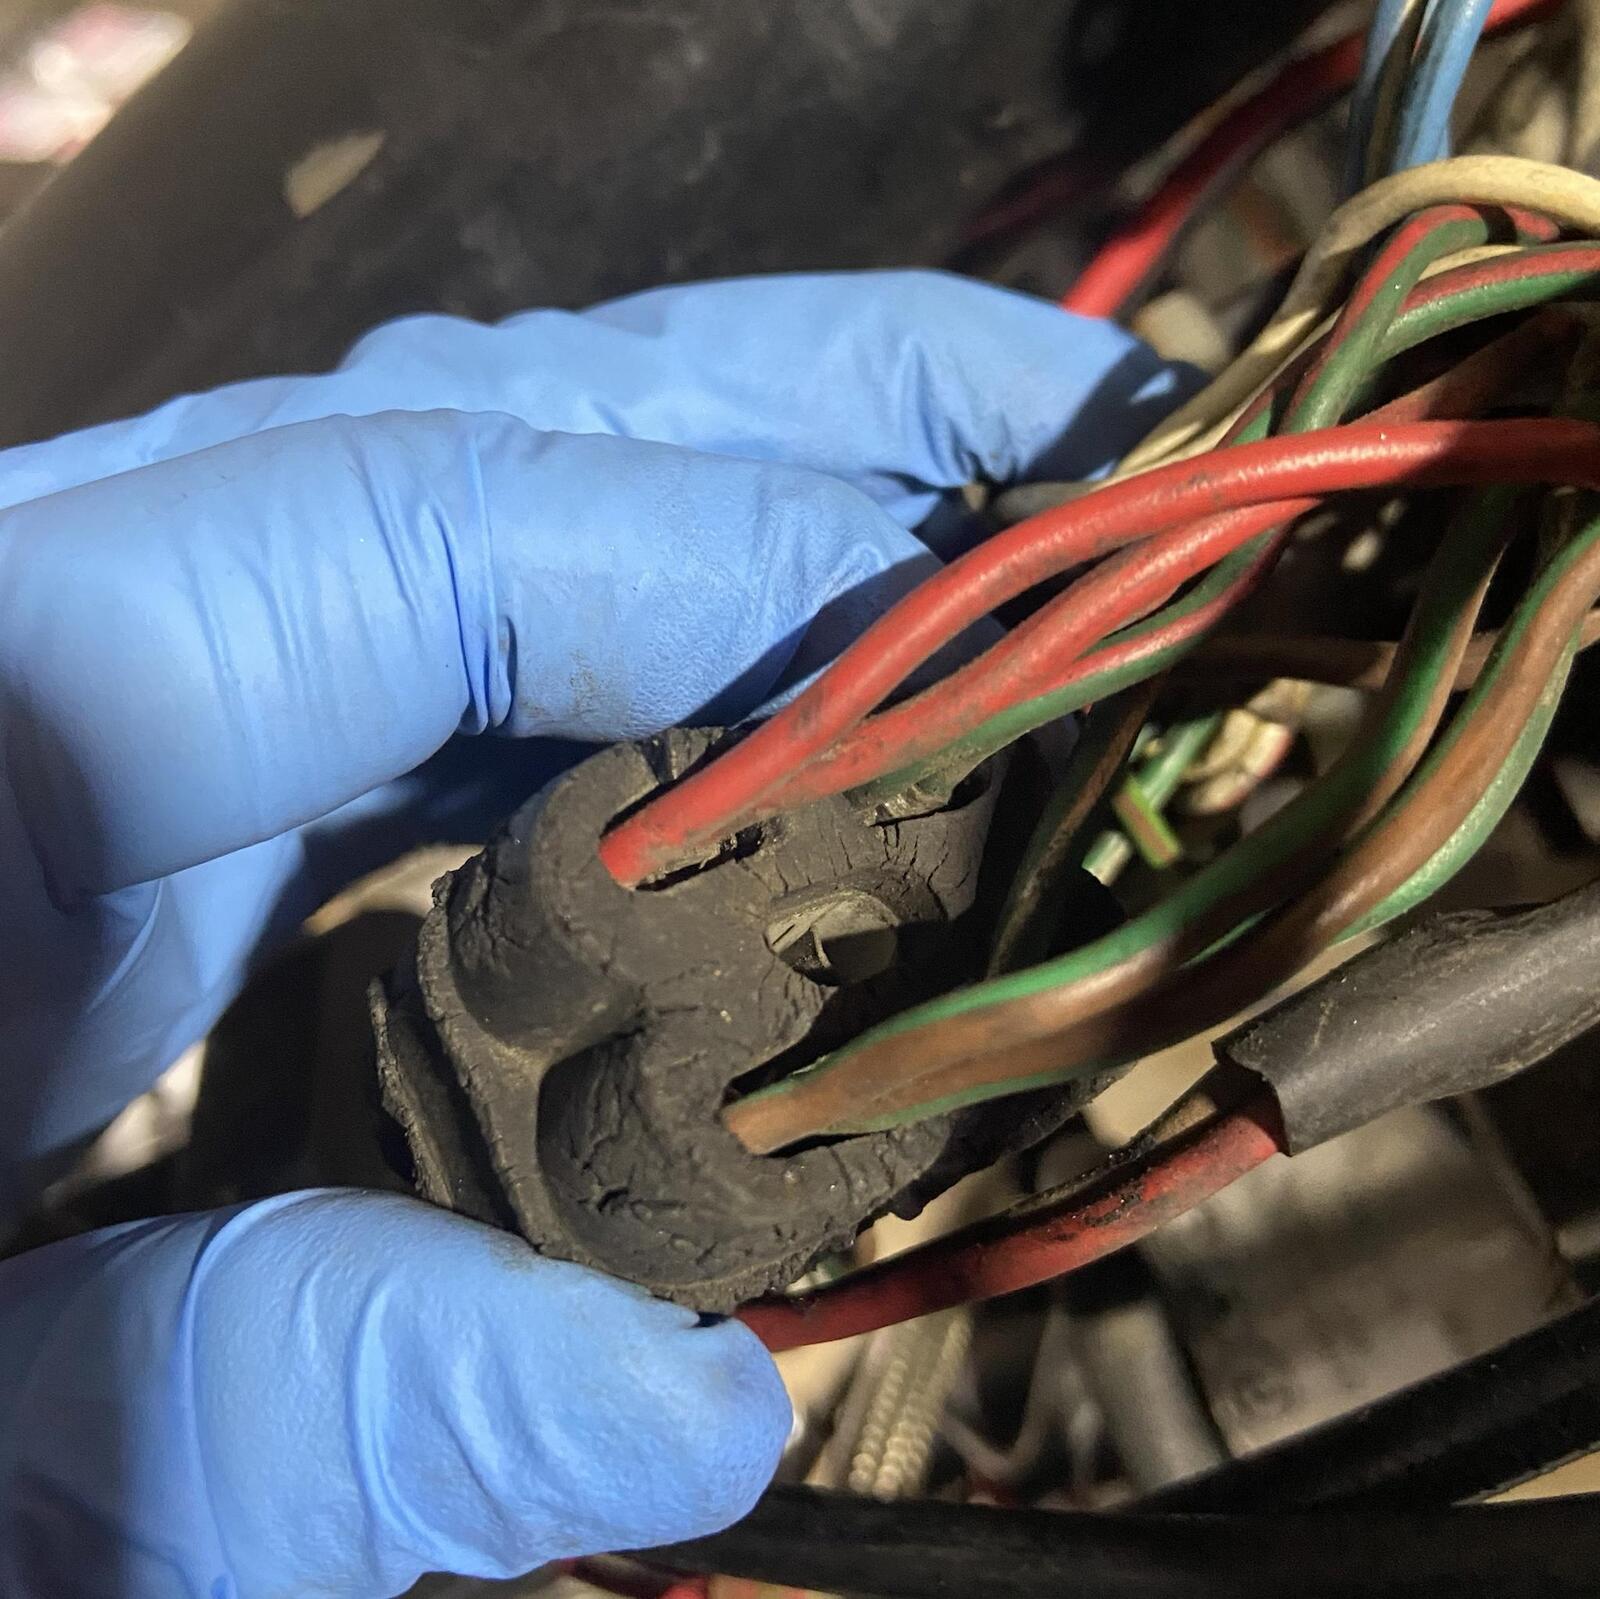 Wiring Nightmares | Access Norton Forums - Classic Motorcycle Information